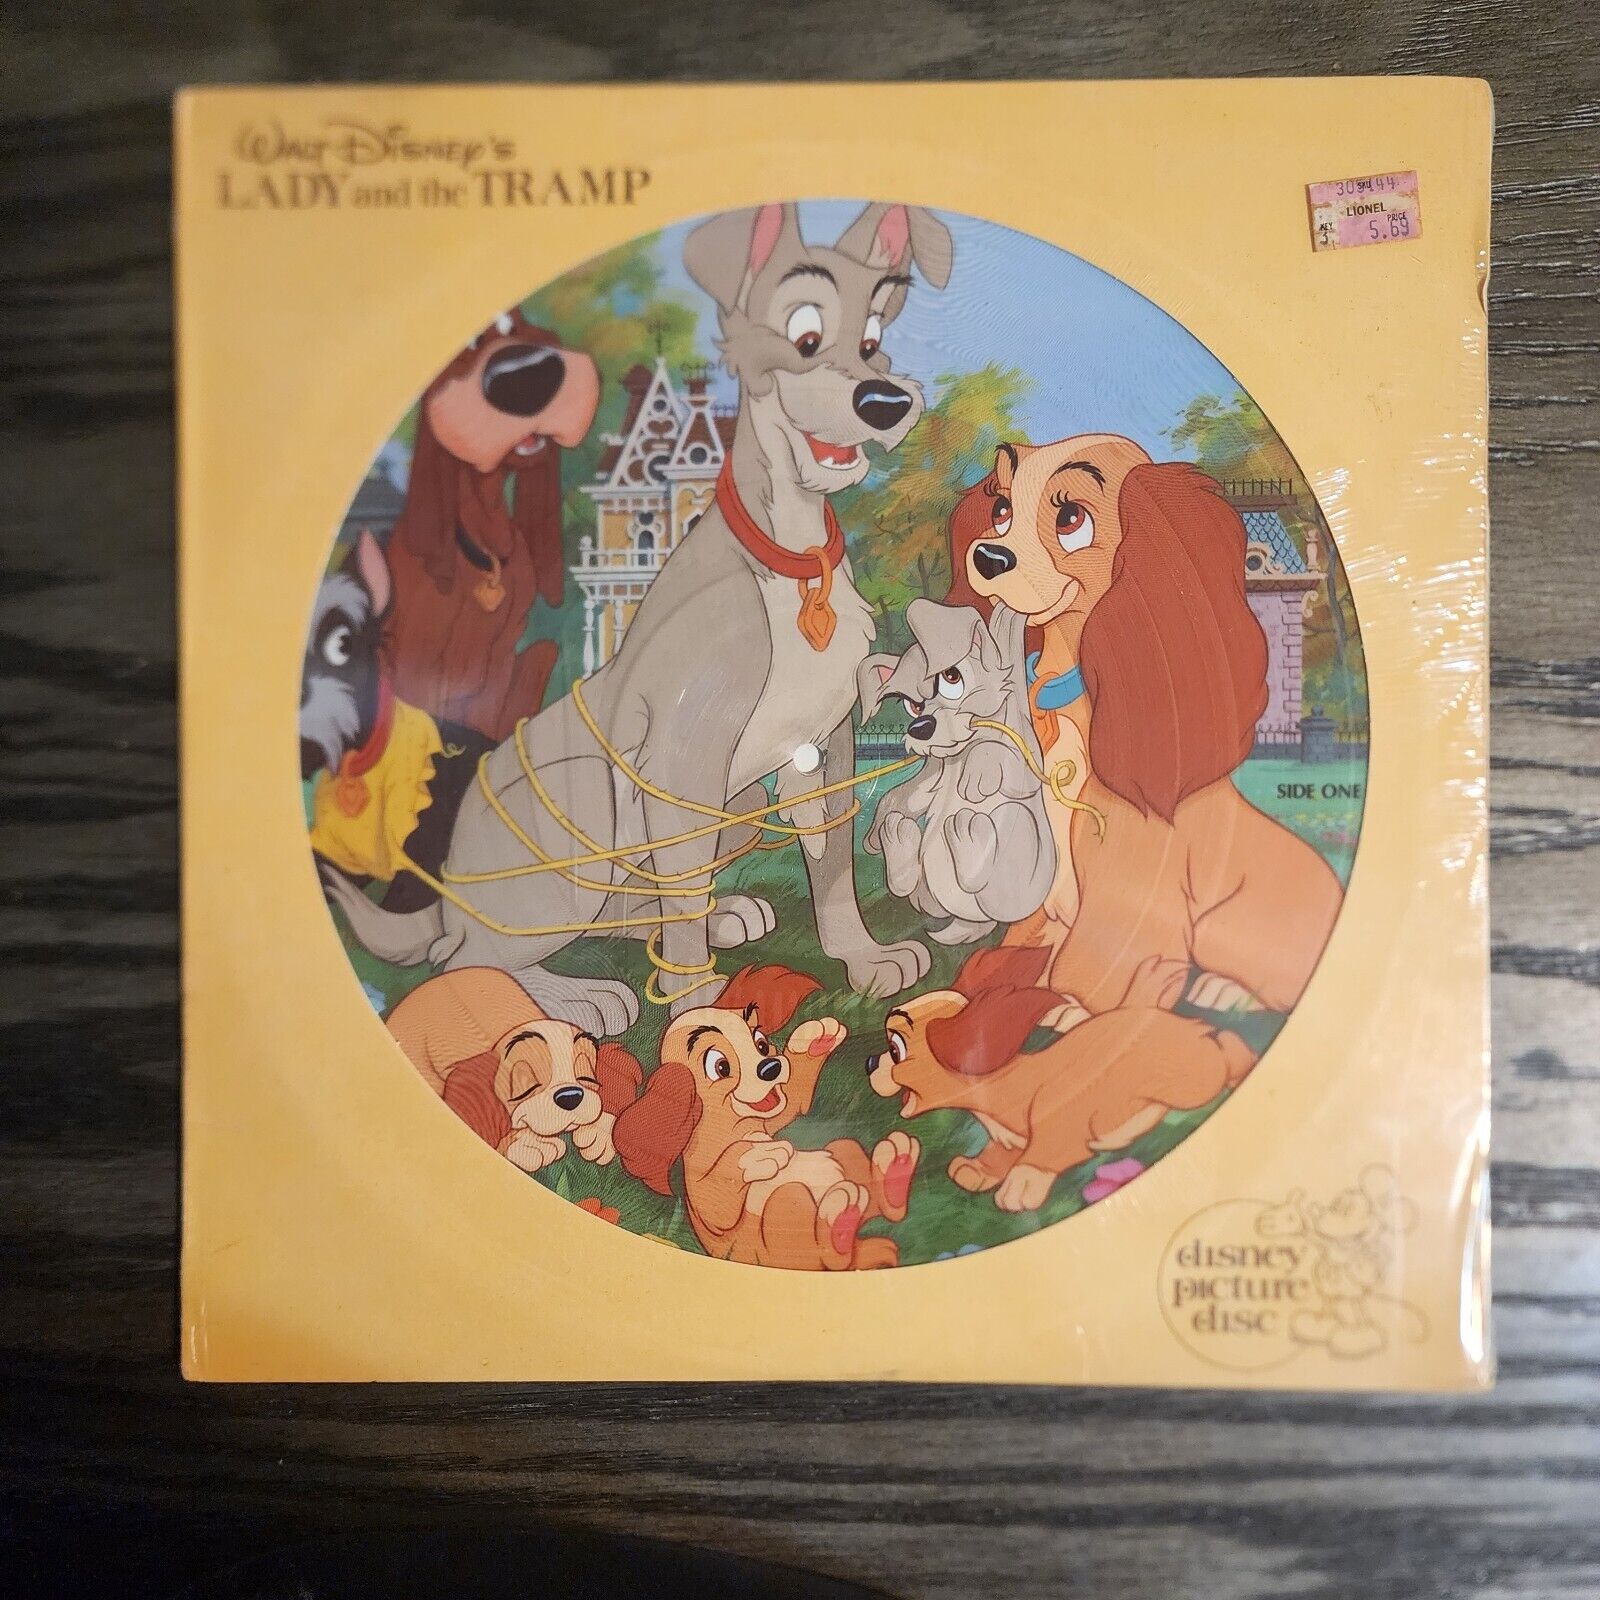 Lady And The Tramp 1980 Walt Disney Productions LP Picture Disc Disneyland 3103